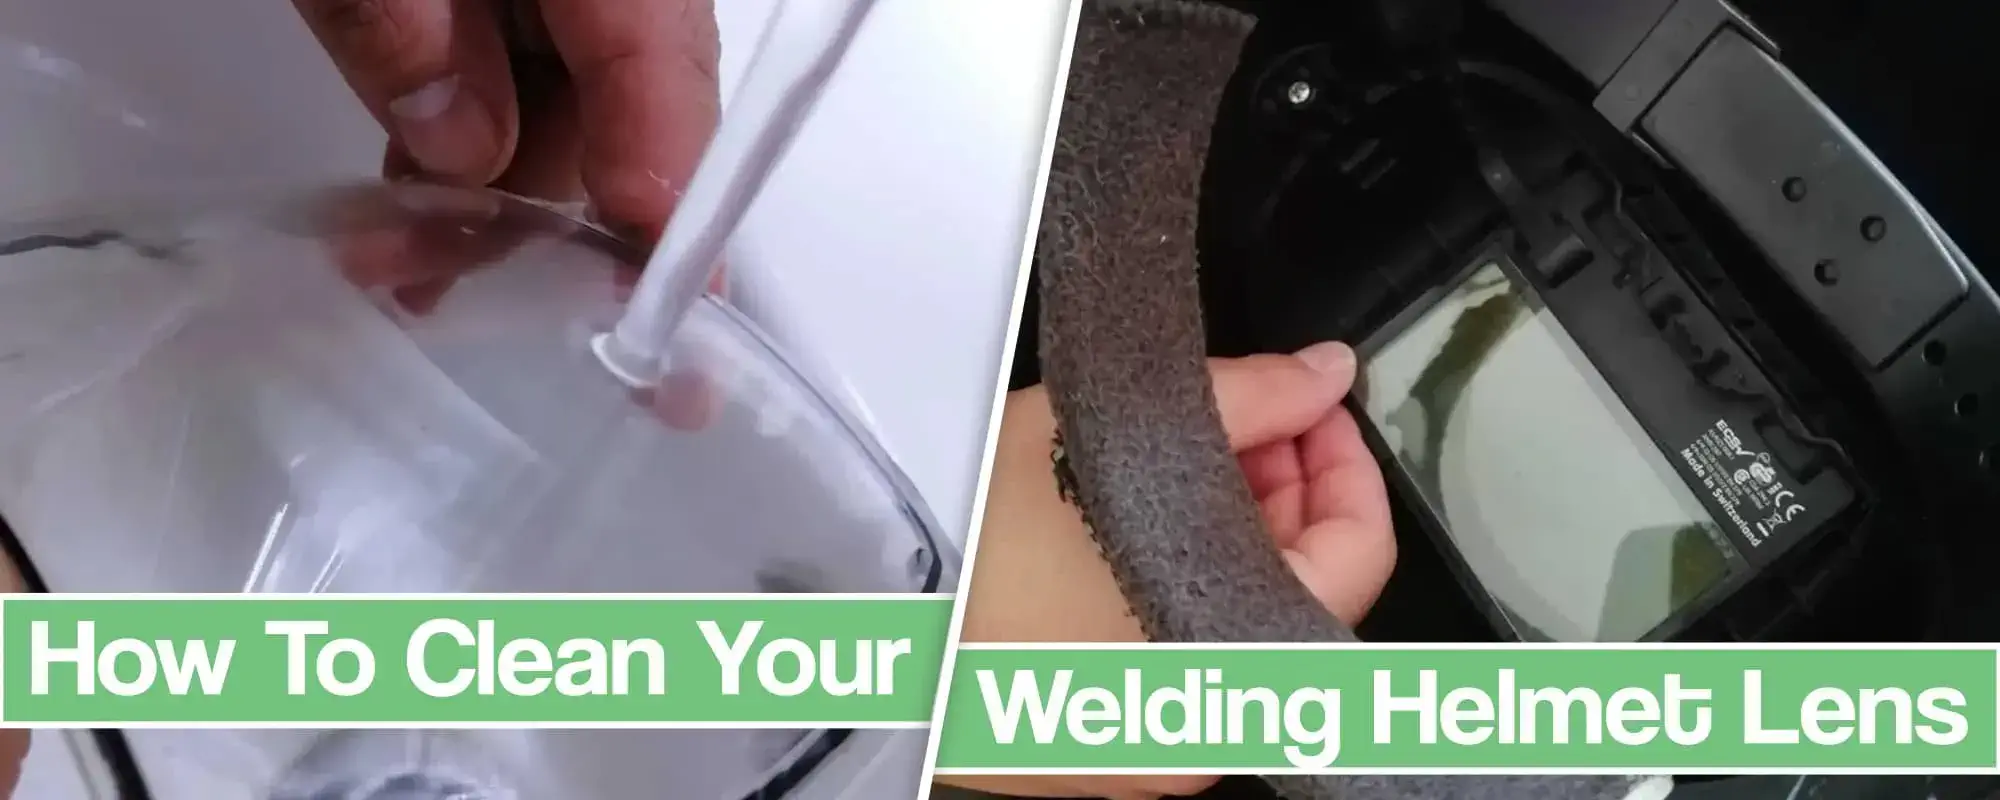 Feature image for How To Clean Your Welding Helmet-Lens article